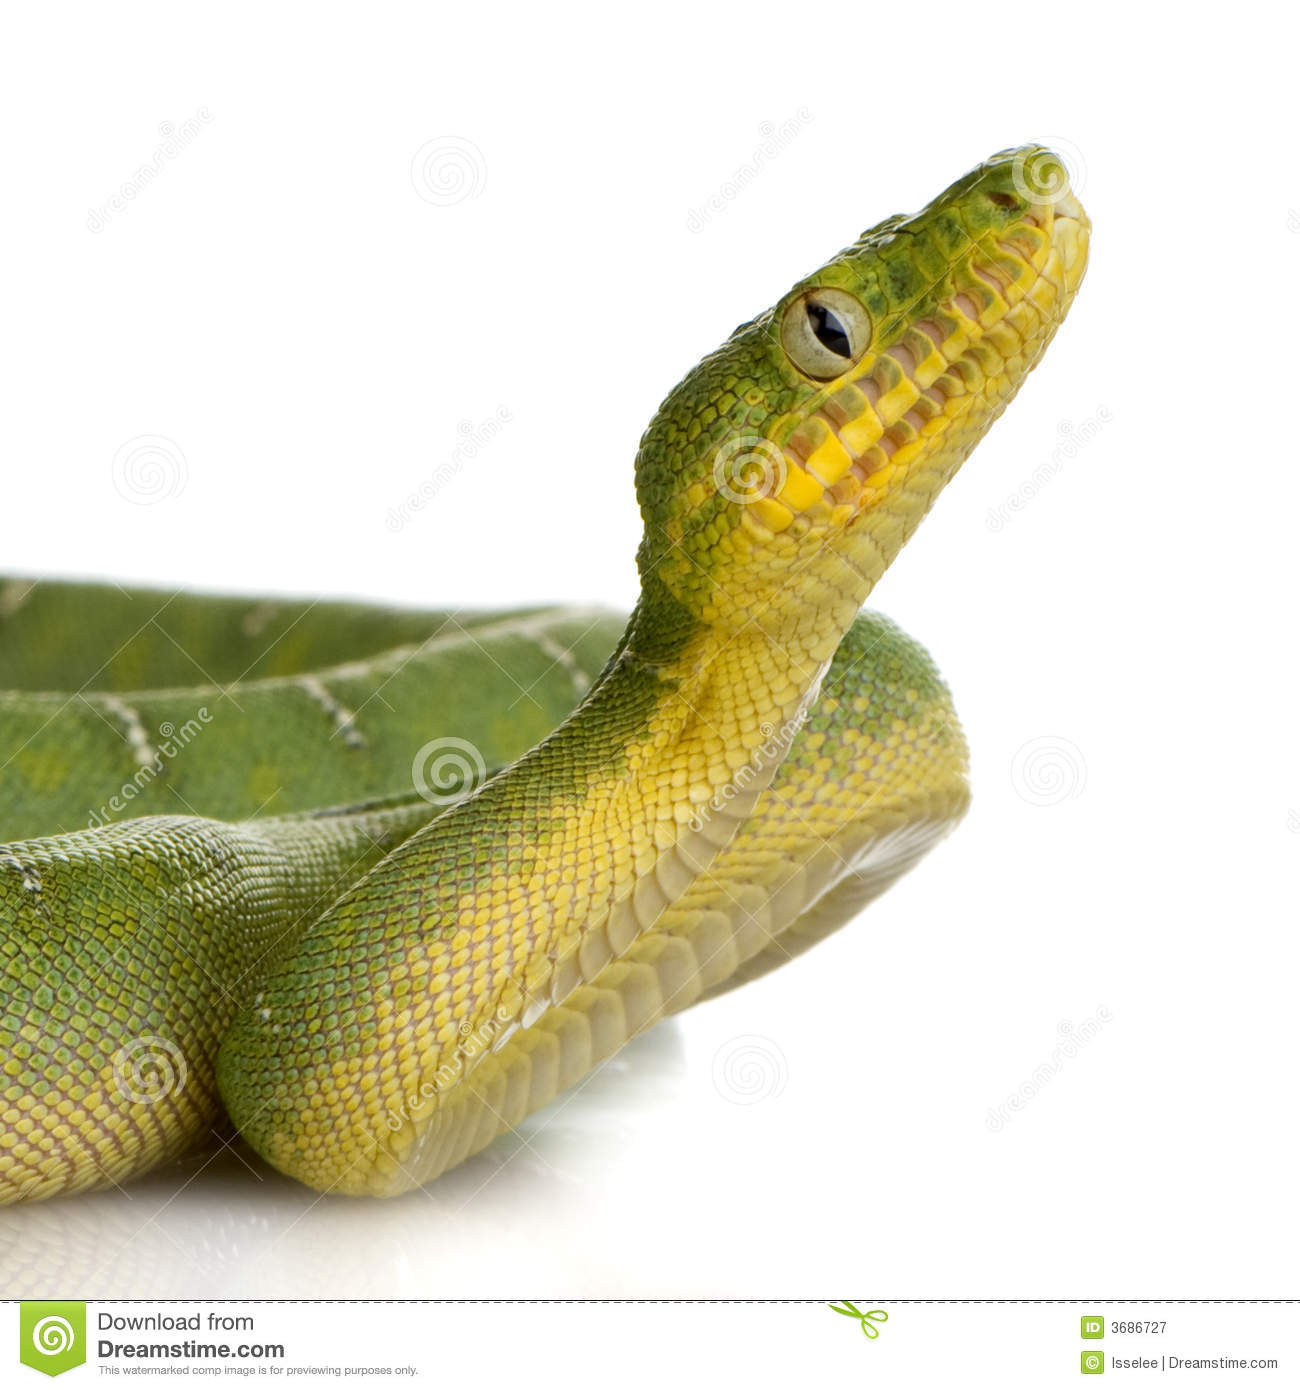 Emerald Tree Boa clipart #9, Download drawings